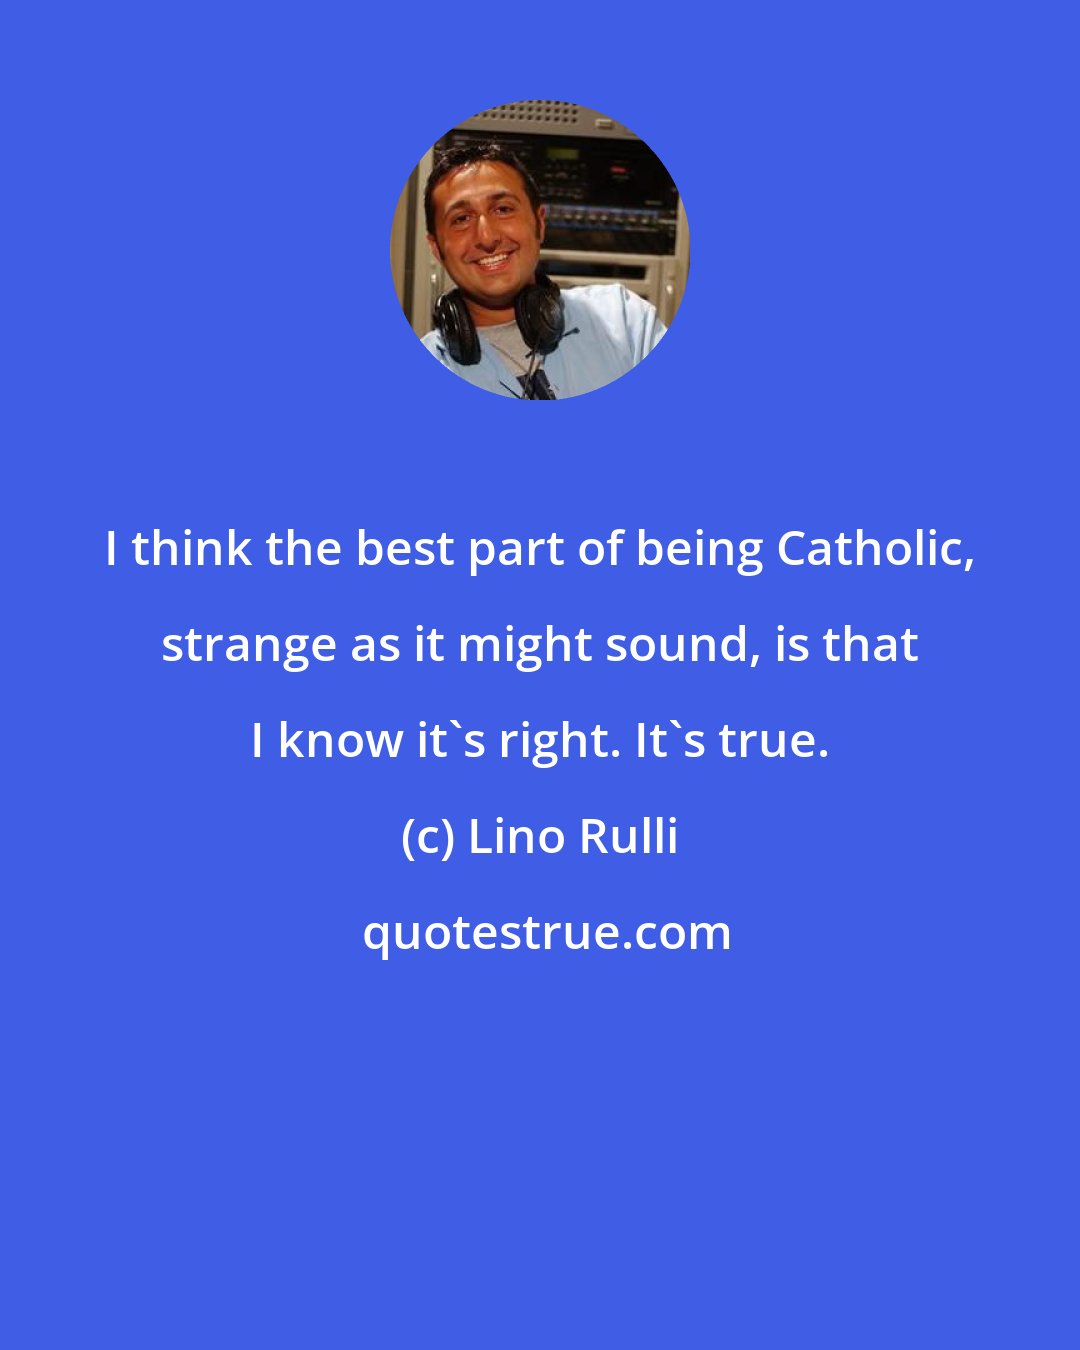 Lino Rulli: I think the best part of being Catholic, strange as it might sound, is that I know it's right. It's true.